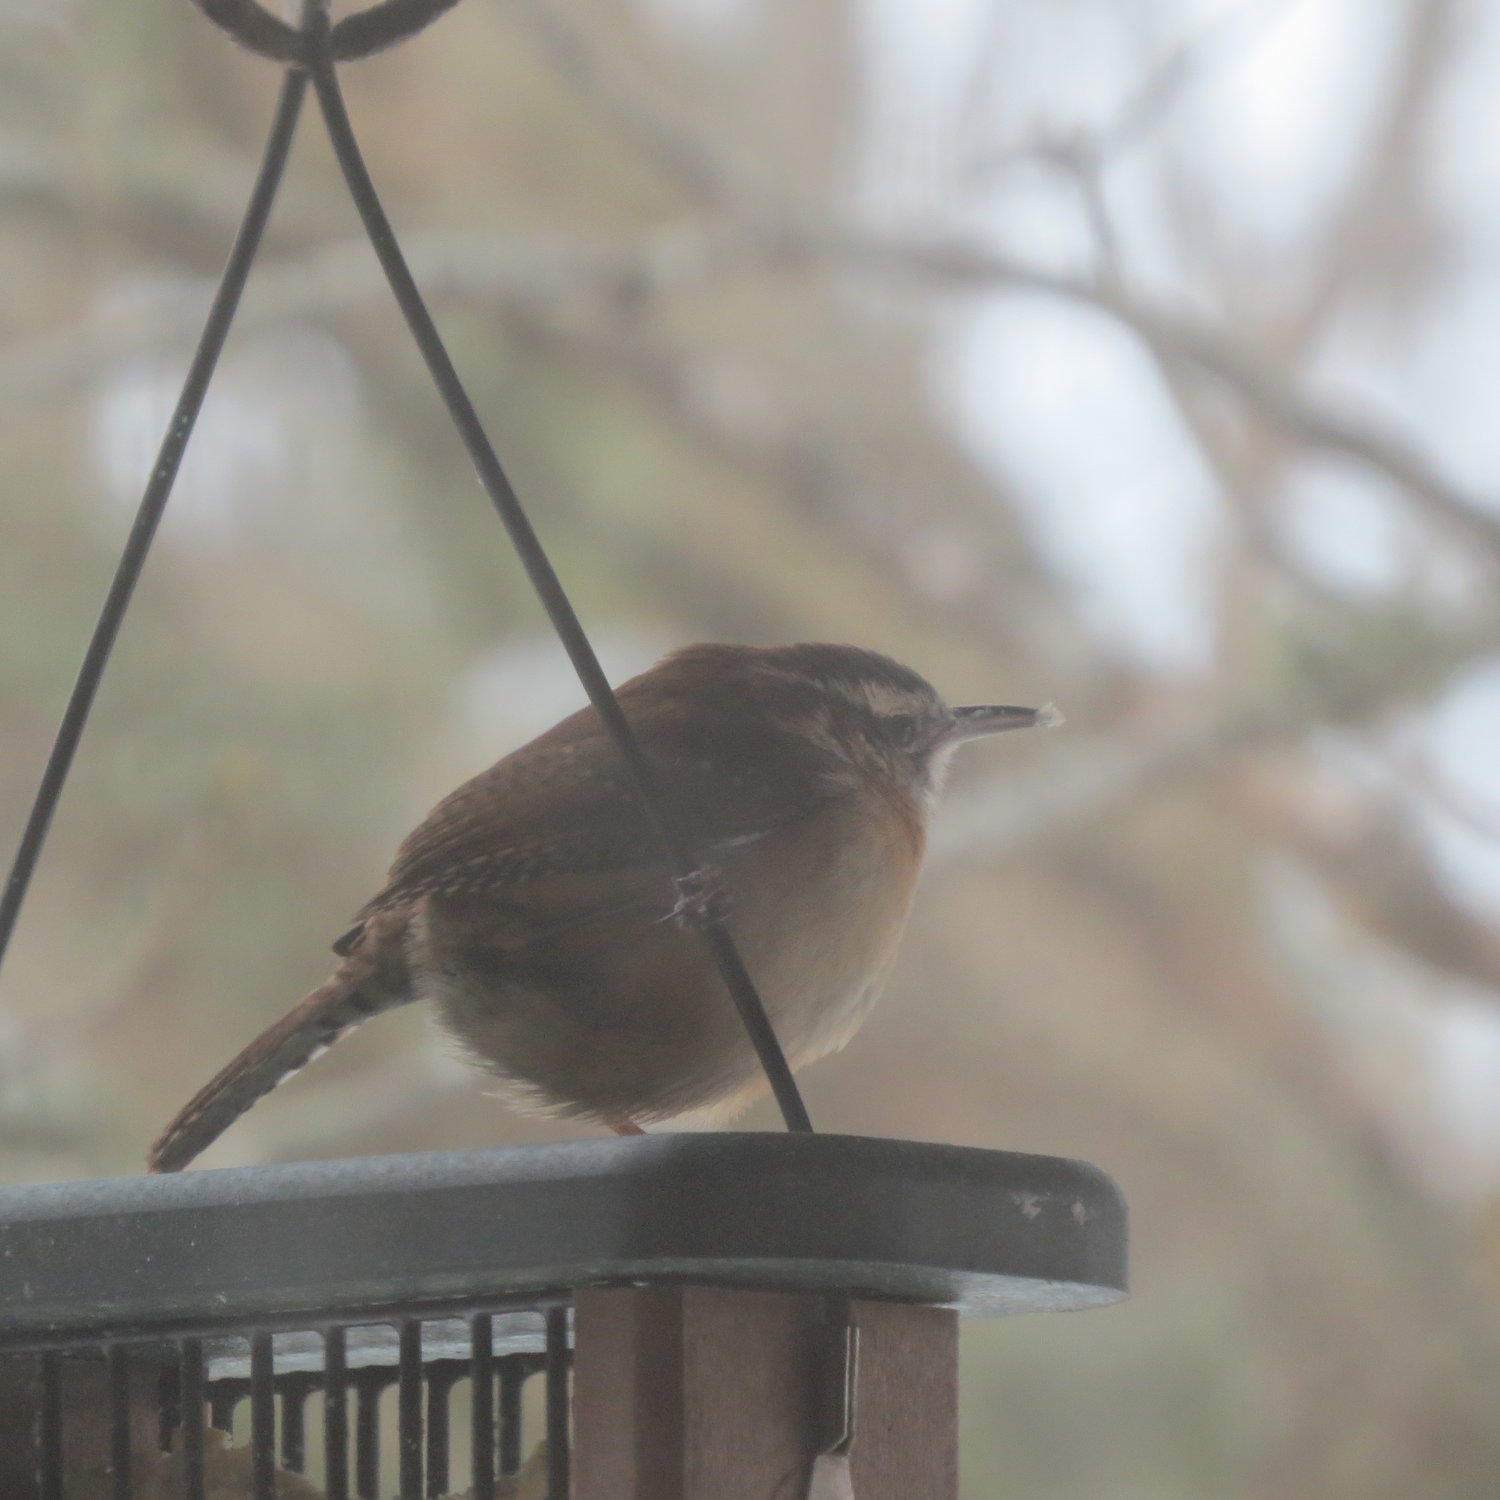 A chilly Carolina Wren. Birds adapt to the cold by puffing up their body feathers to trap heat.